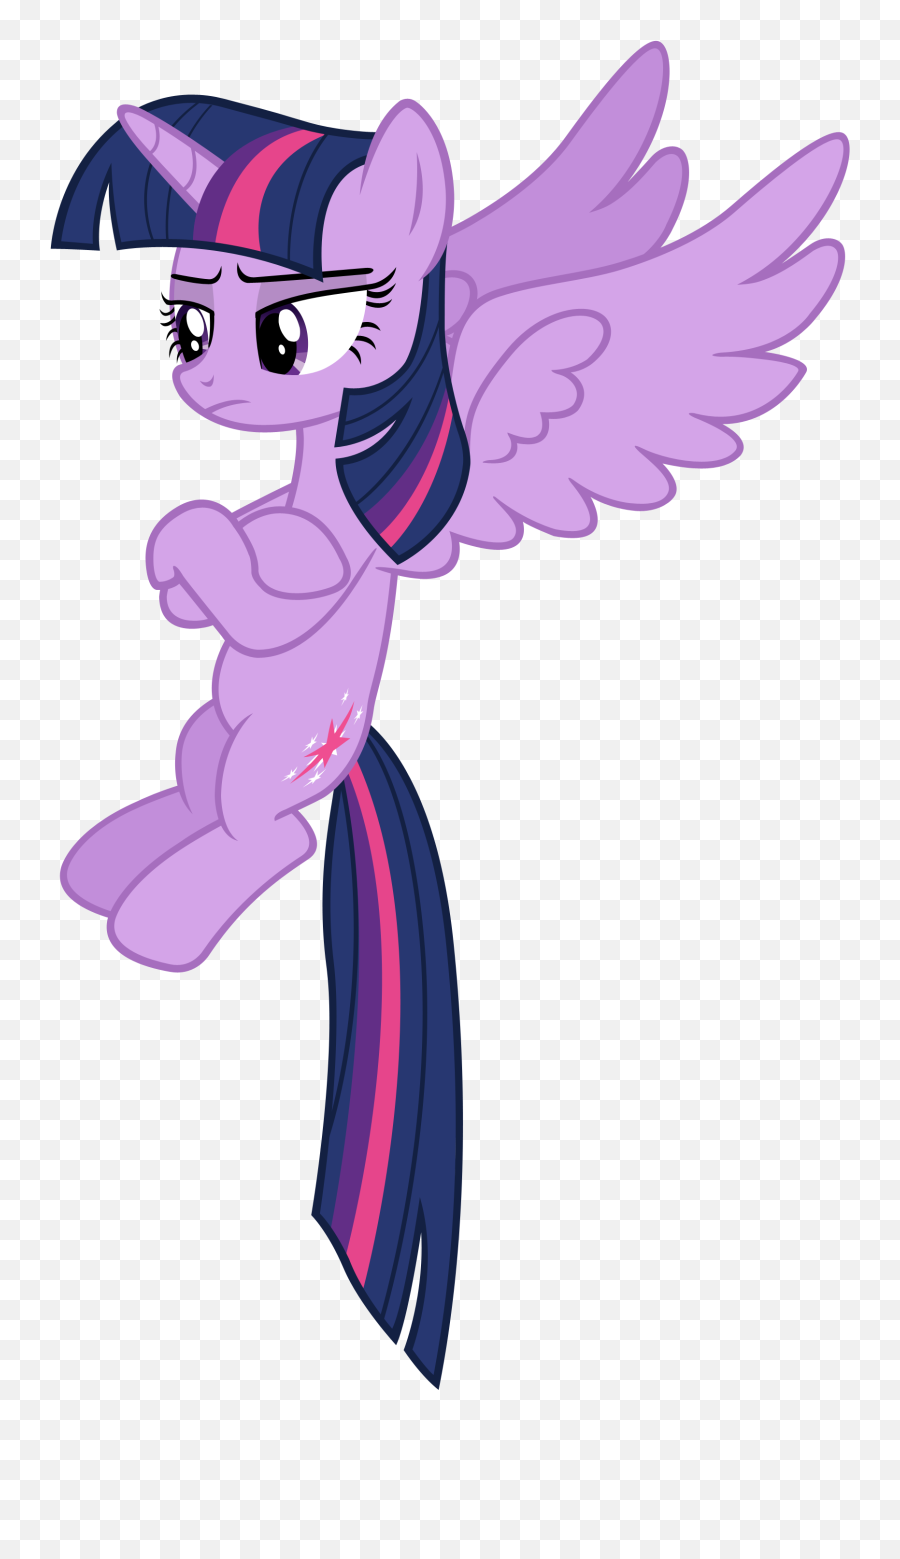 Source Needed Transparent Background Twilight Is - My Twilight Sparkle My Little Pony Transparent Background Emoji,Sparkle Transparent Background